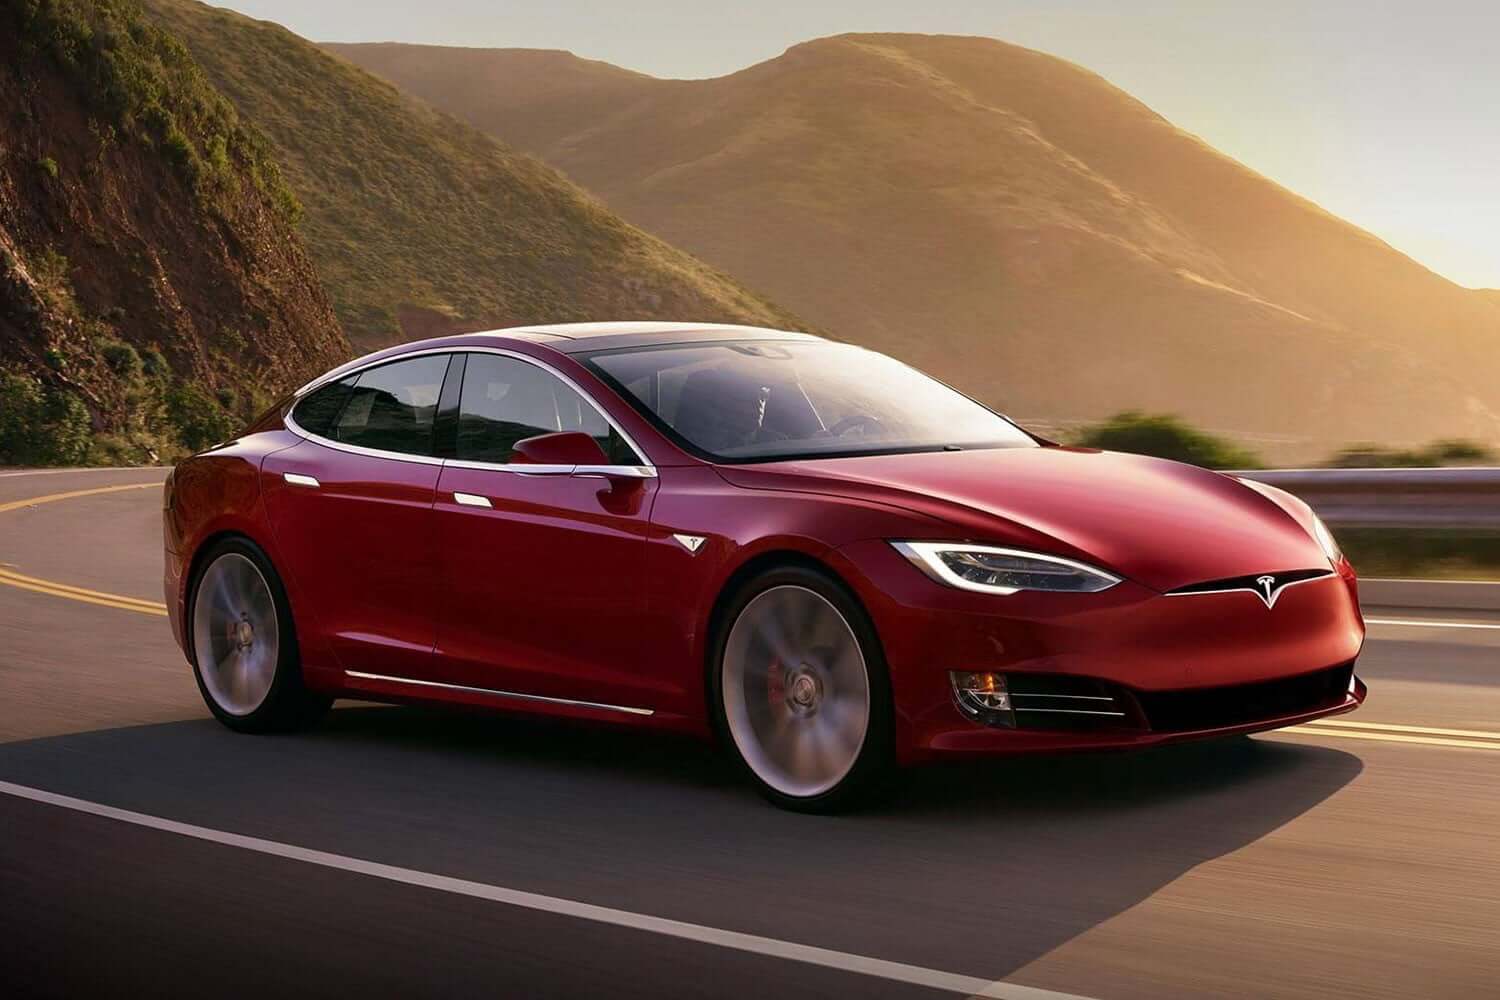 Engineers have found a way to make a Tesla twice as good